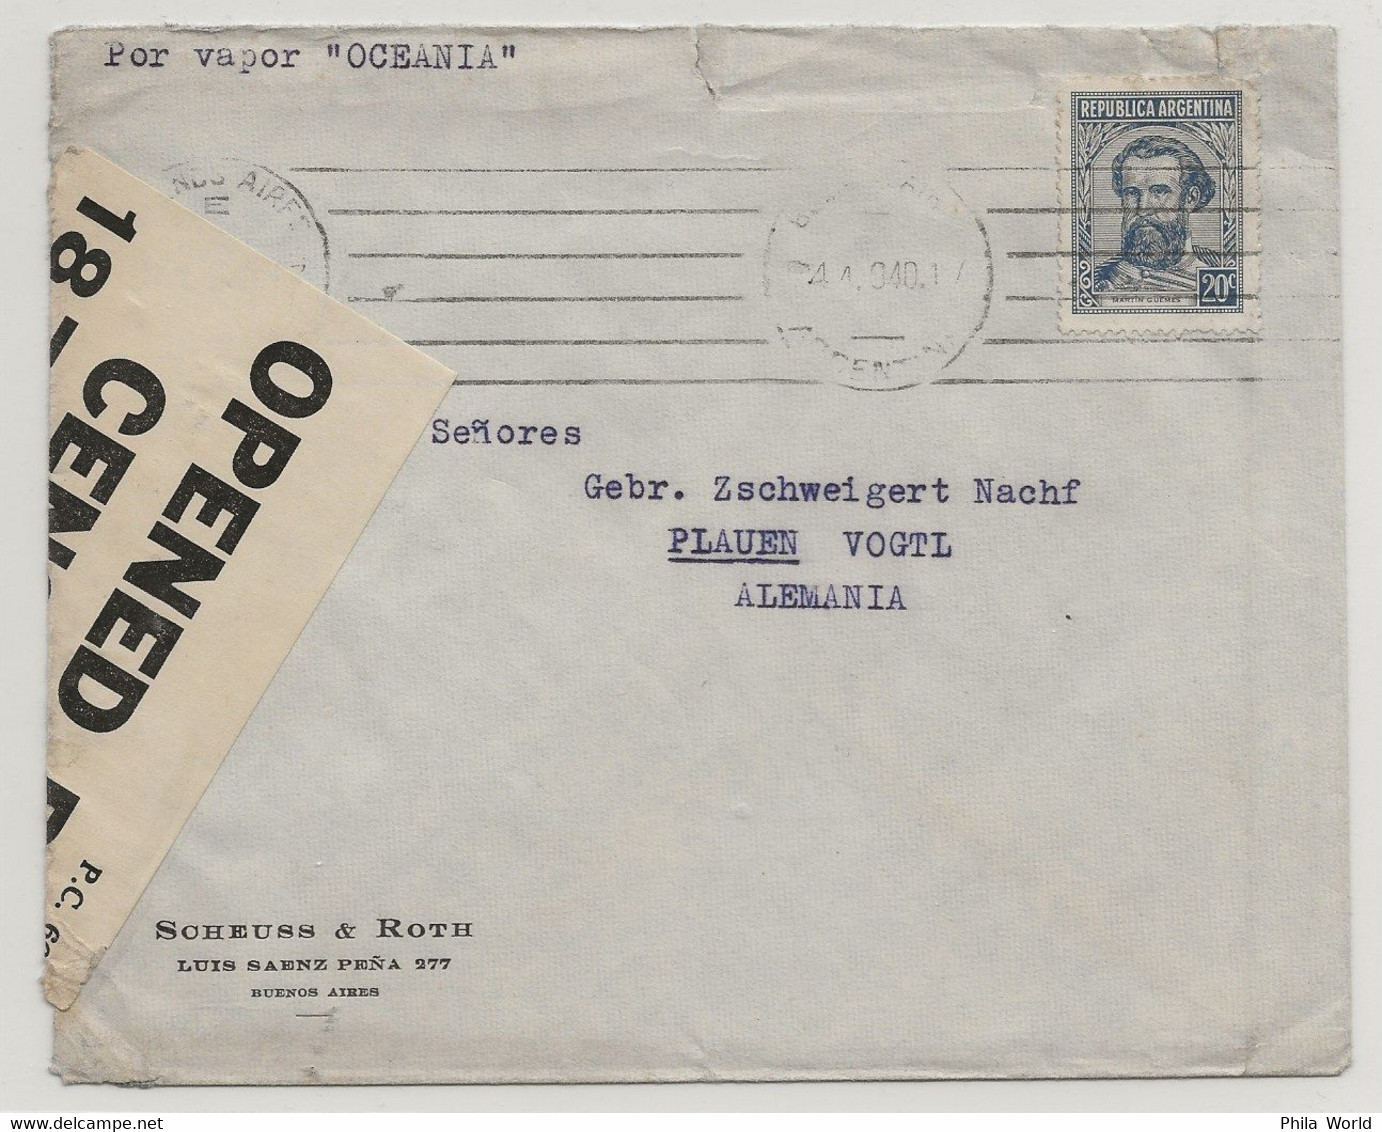 WW2 1940 ARGENTINA Por Vapor OCEANIA Maritime Mail Cover British Censorship 1878 And German Censored To GERMANY - WW2